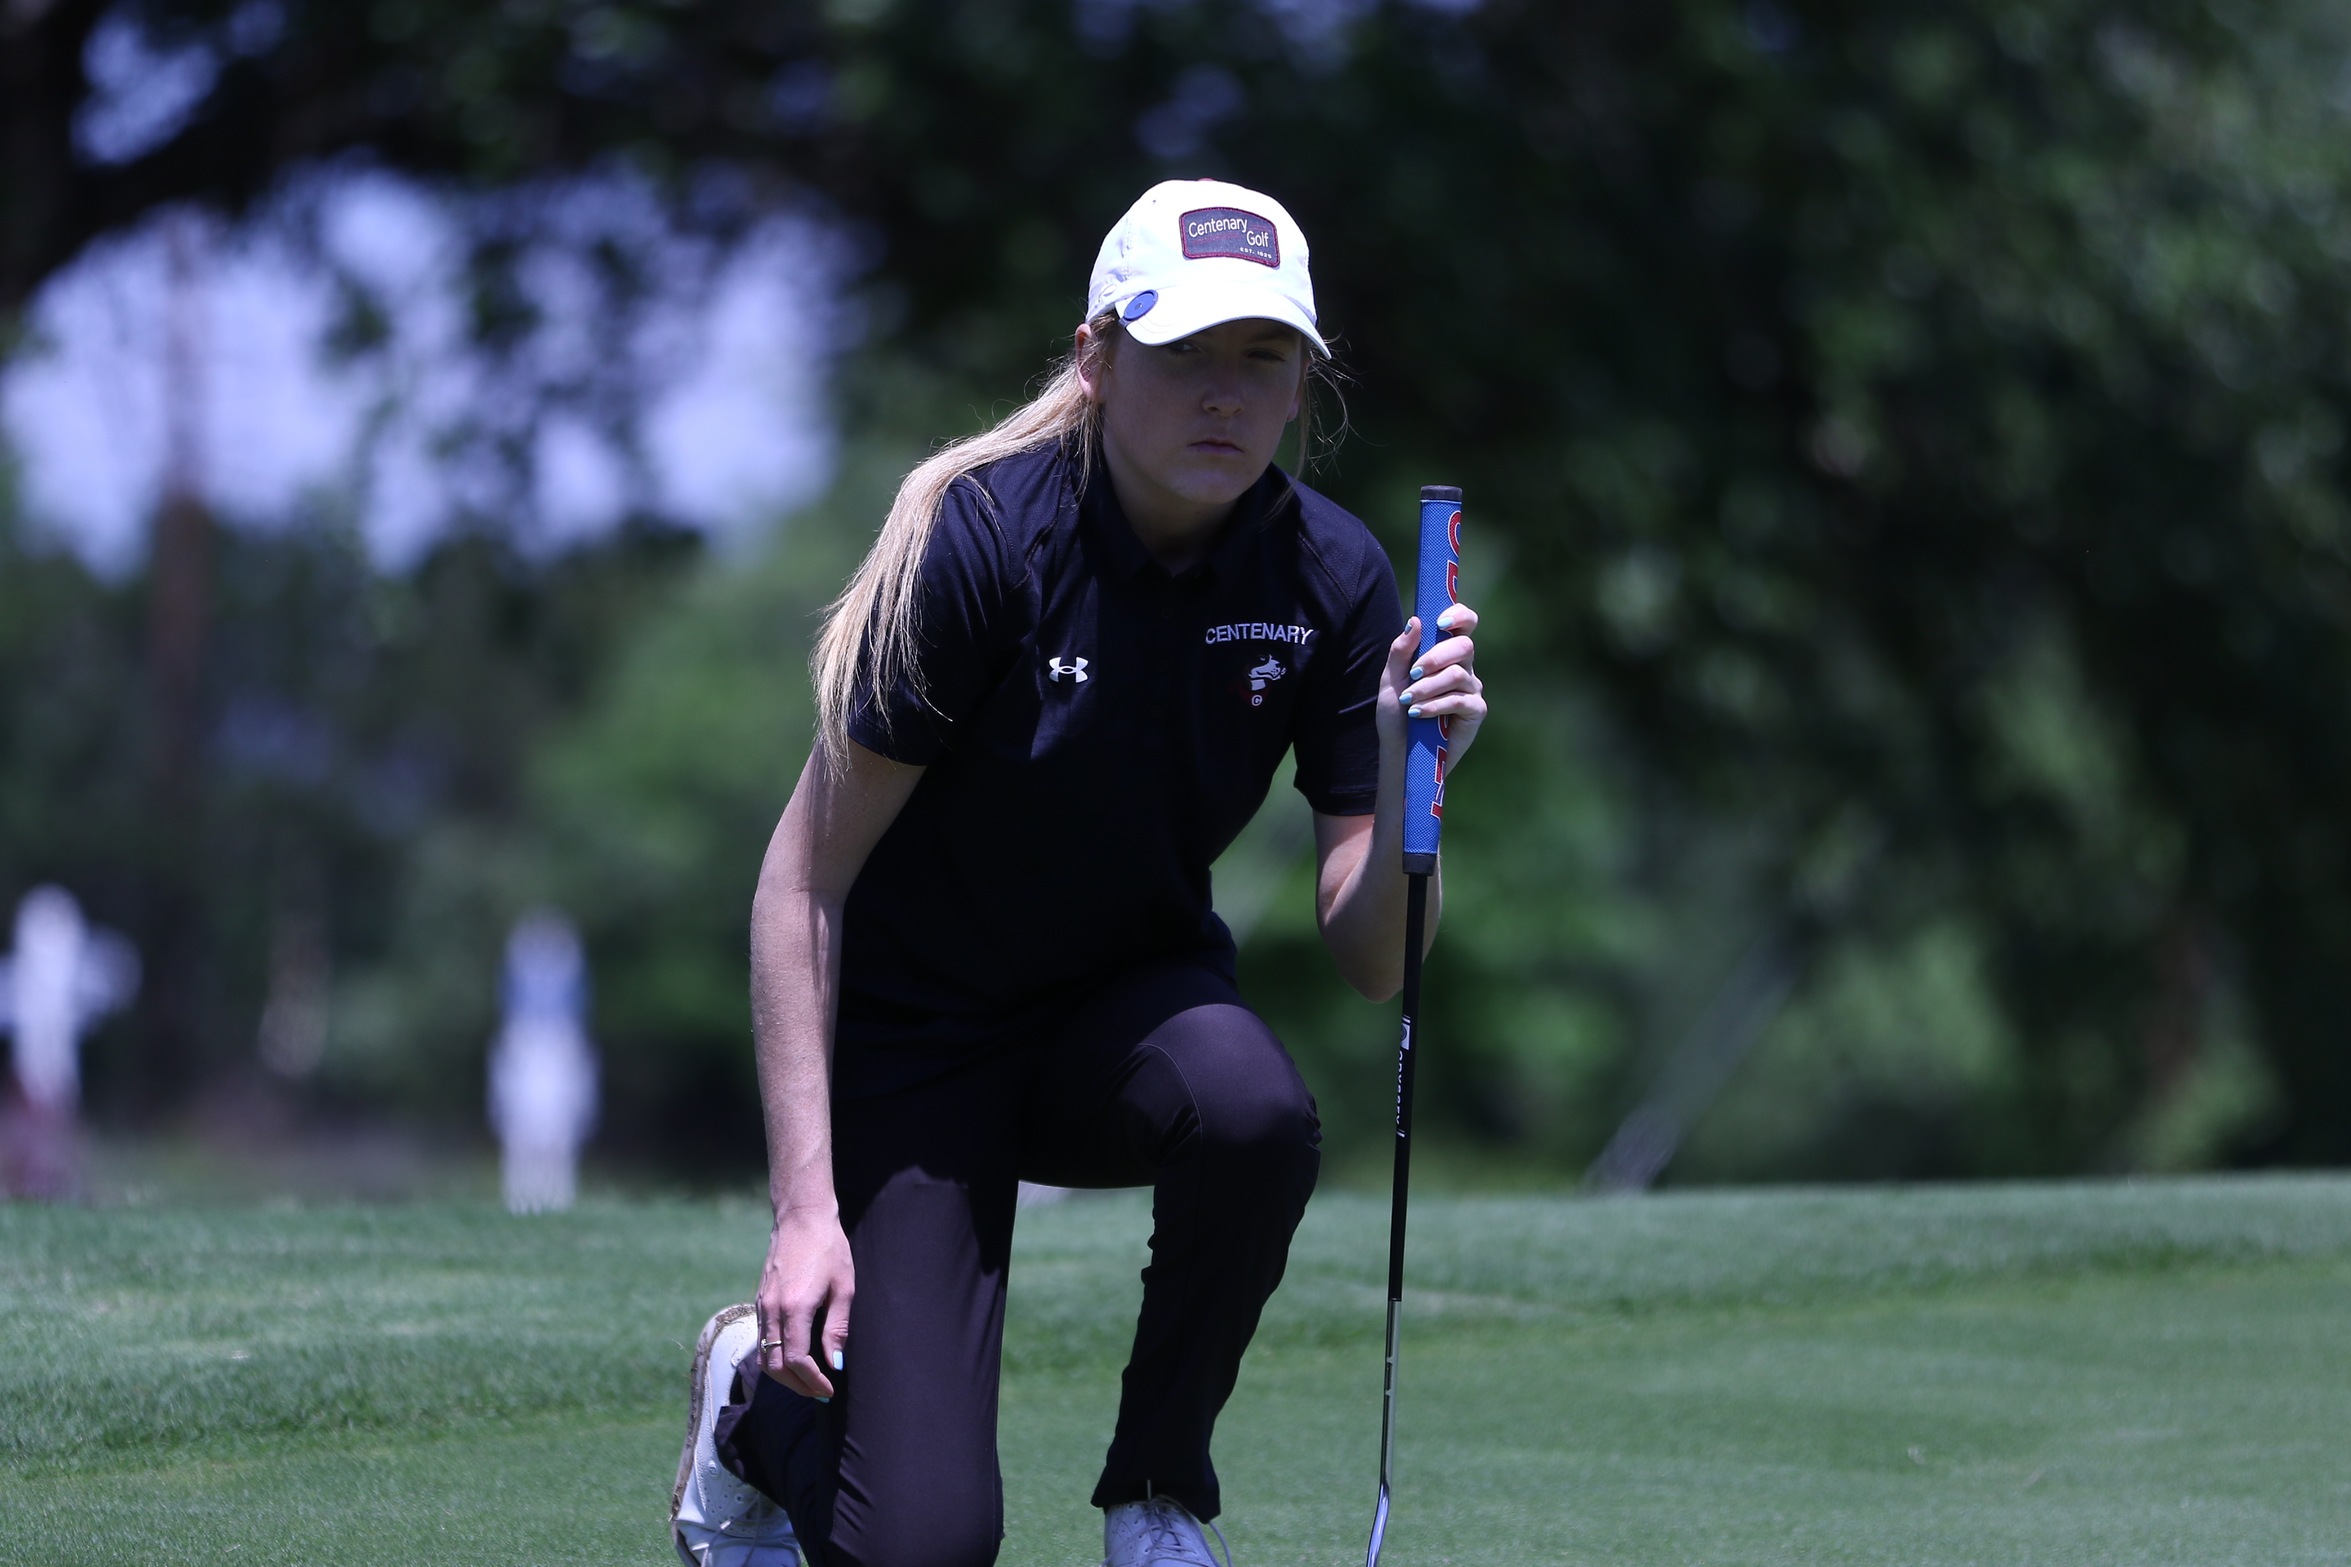 Freshman Hailey Adams shot the Ladies' lowest round on Sunday and is in 26th place overall.